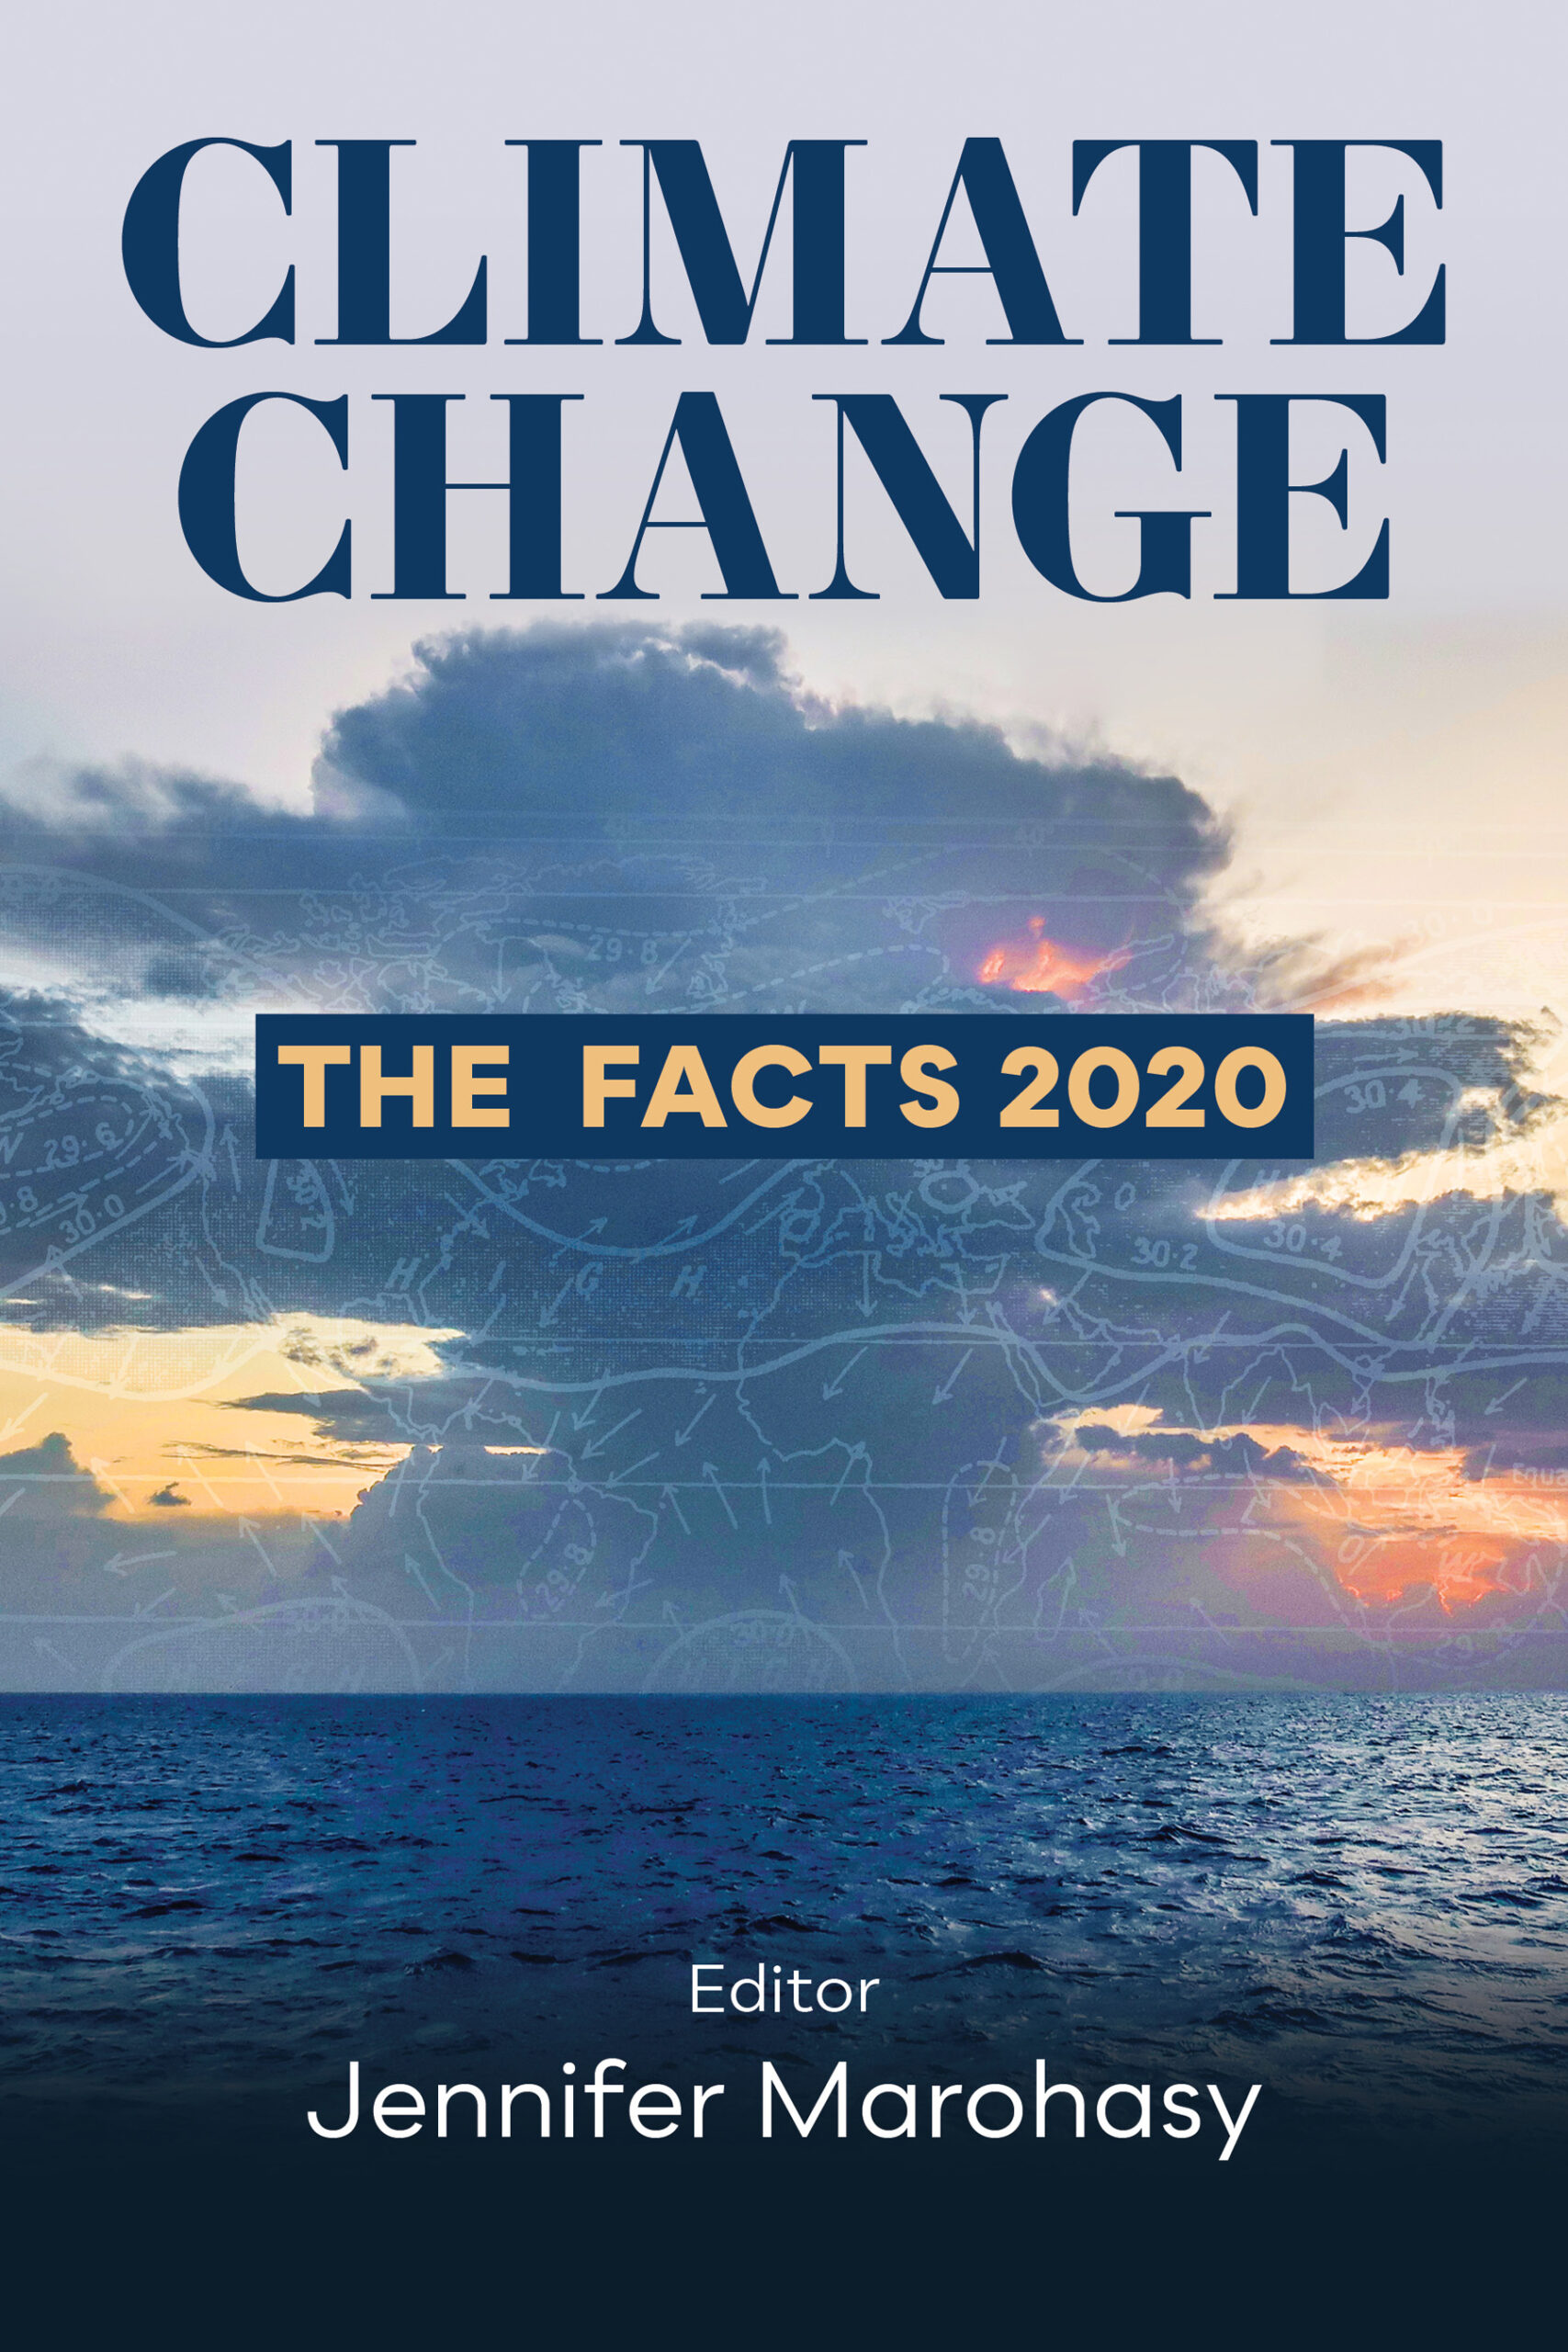 Climate Change The Facts 2020 / Edited by Jennifer Marohasy